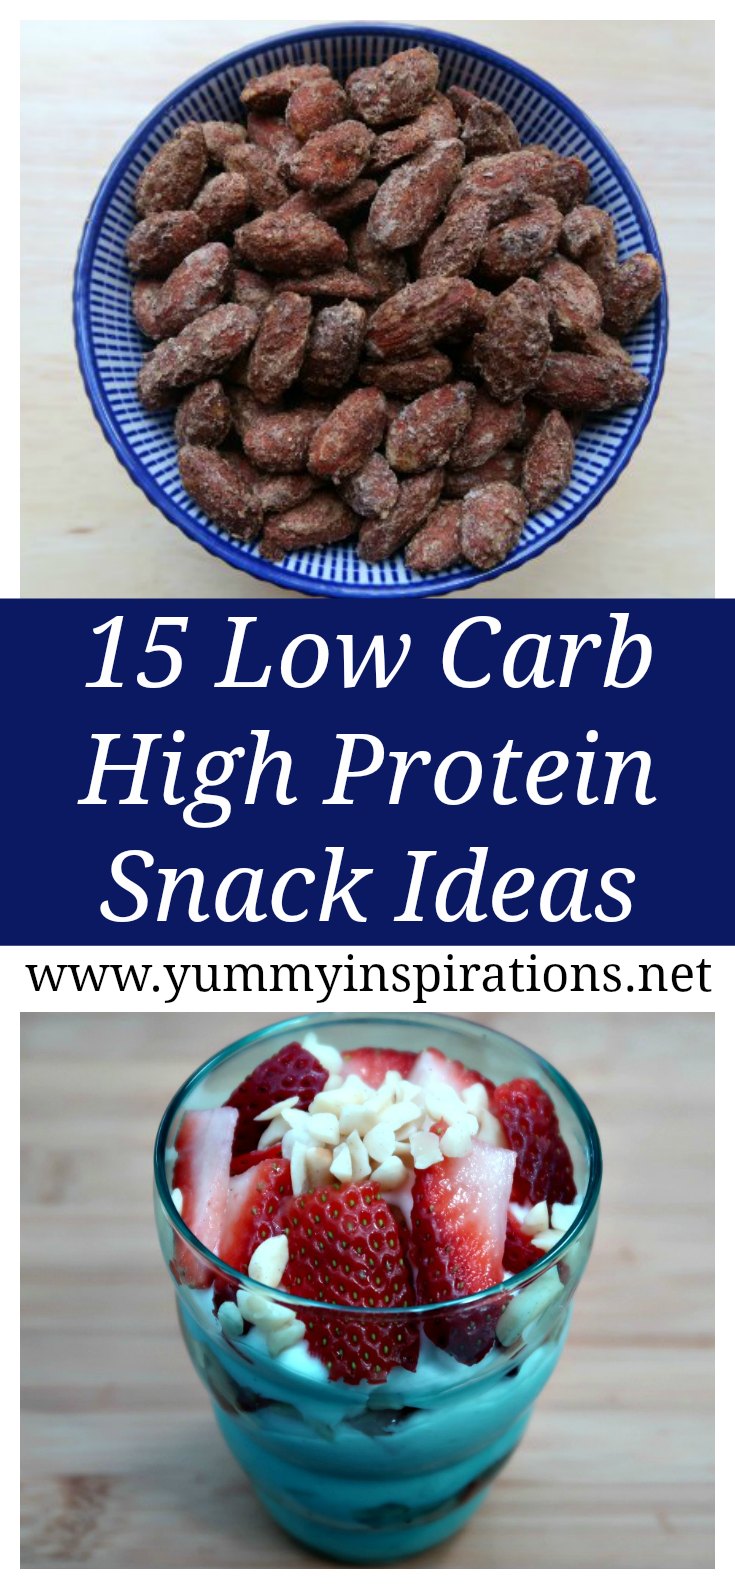 15 Best High Protein Low Carb Snacks Recipes \u2013 Easy Recipes To Make at Home